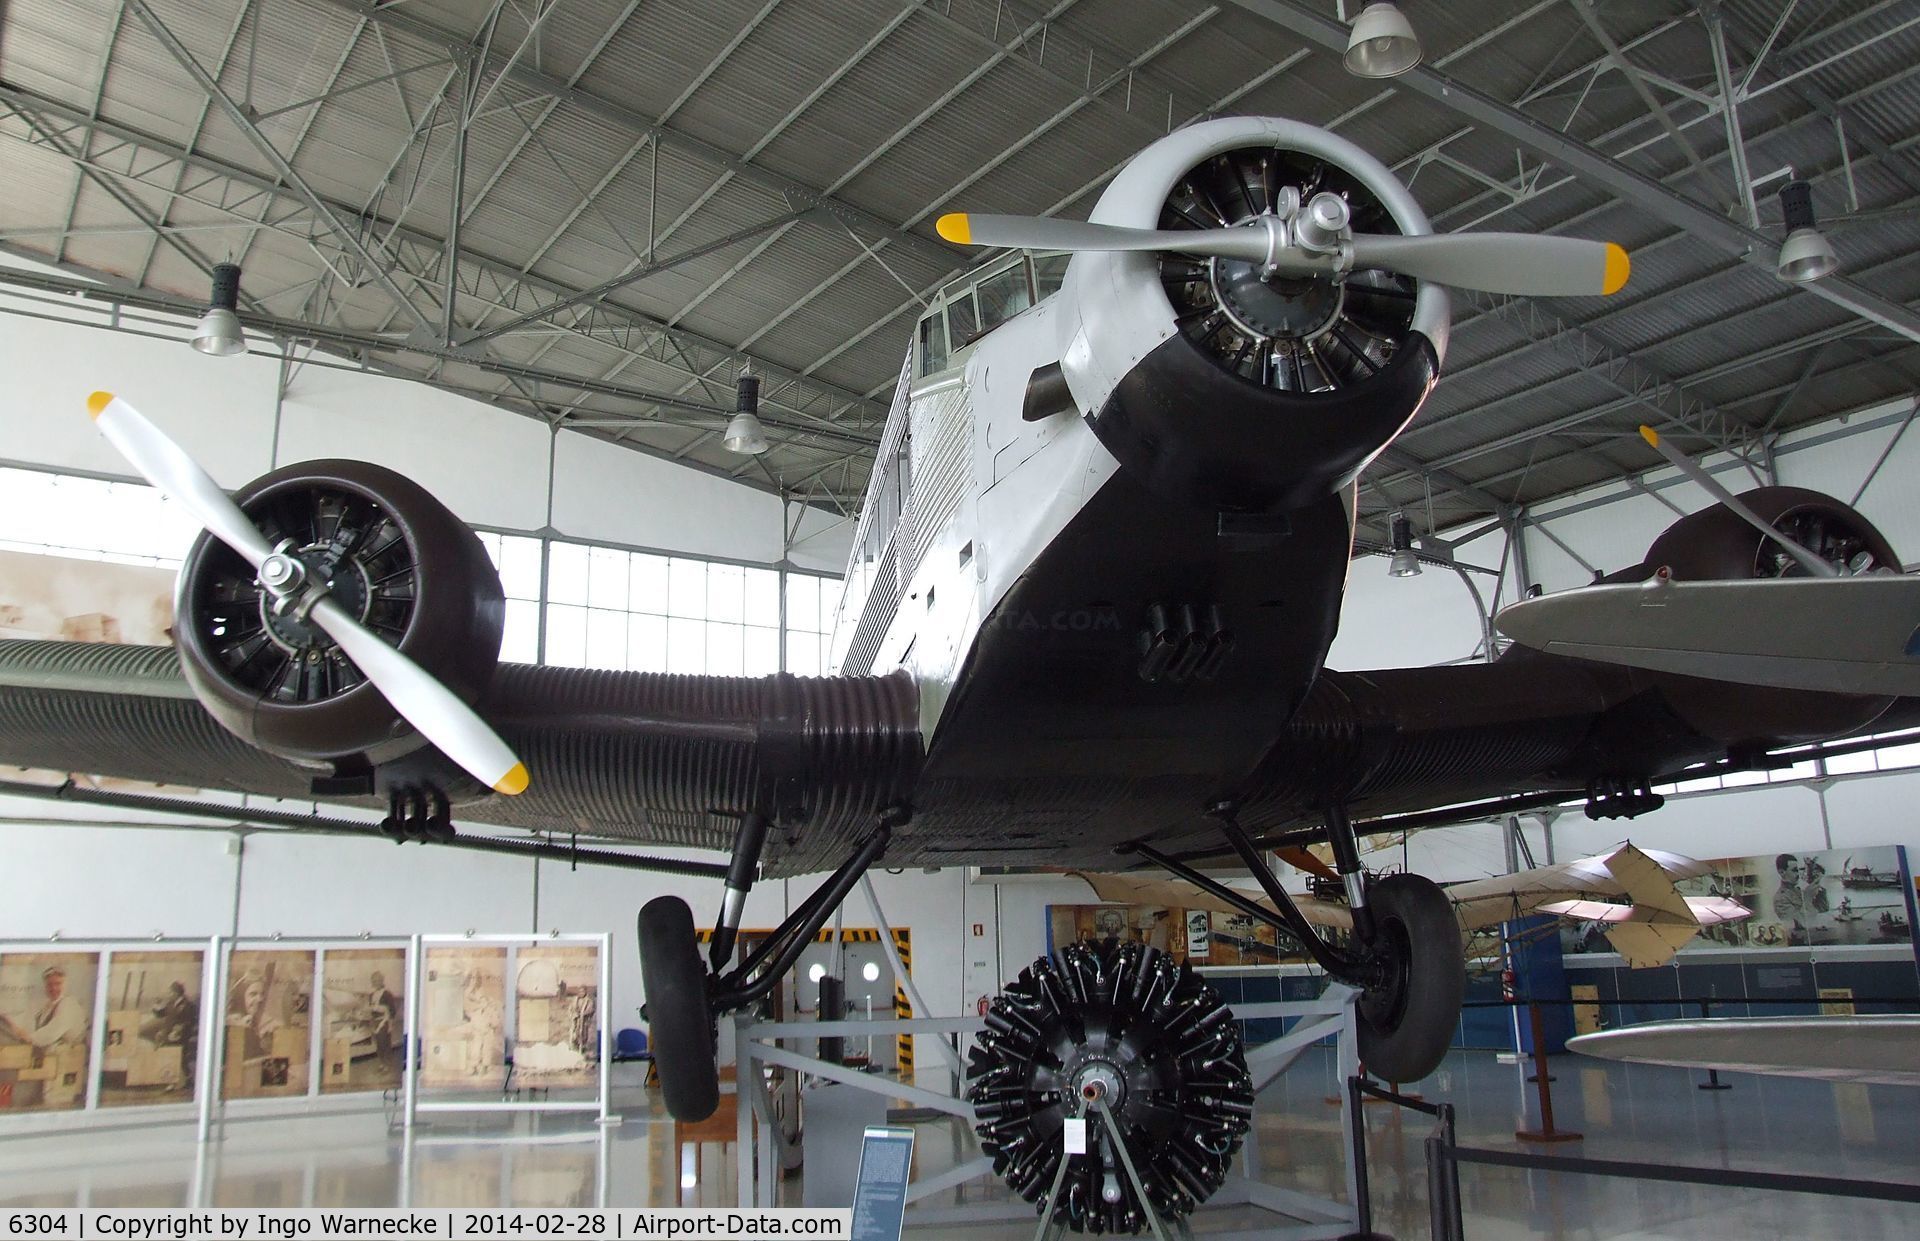 6304, Junkers Ju-52/3mg3e C/N 5661, Junkers Ju 52/3m g3e (converted to Pratt&Whitney engines) at the Museu do Ar, Sintra